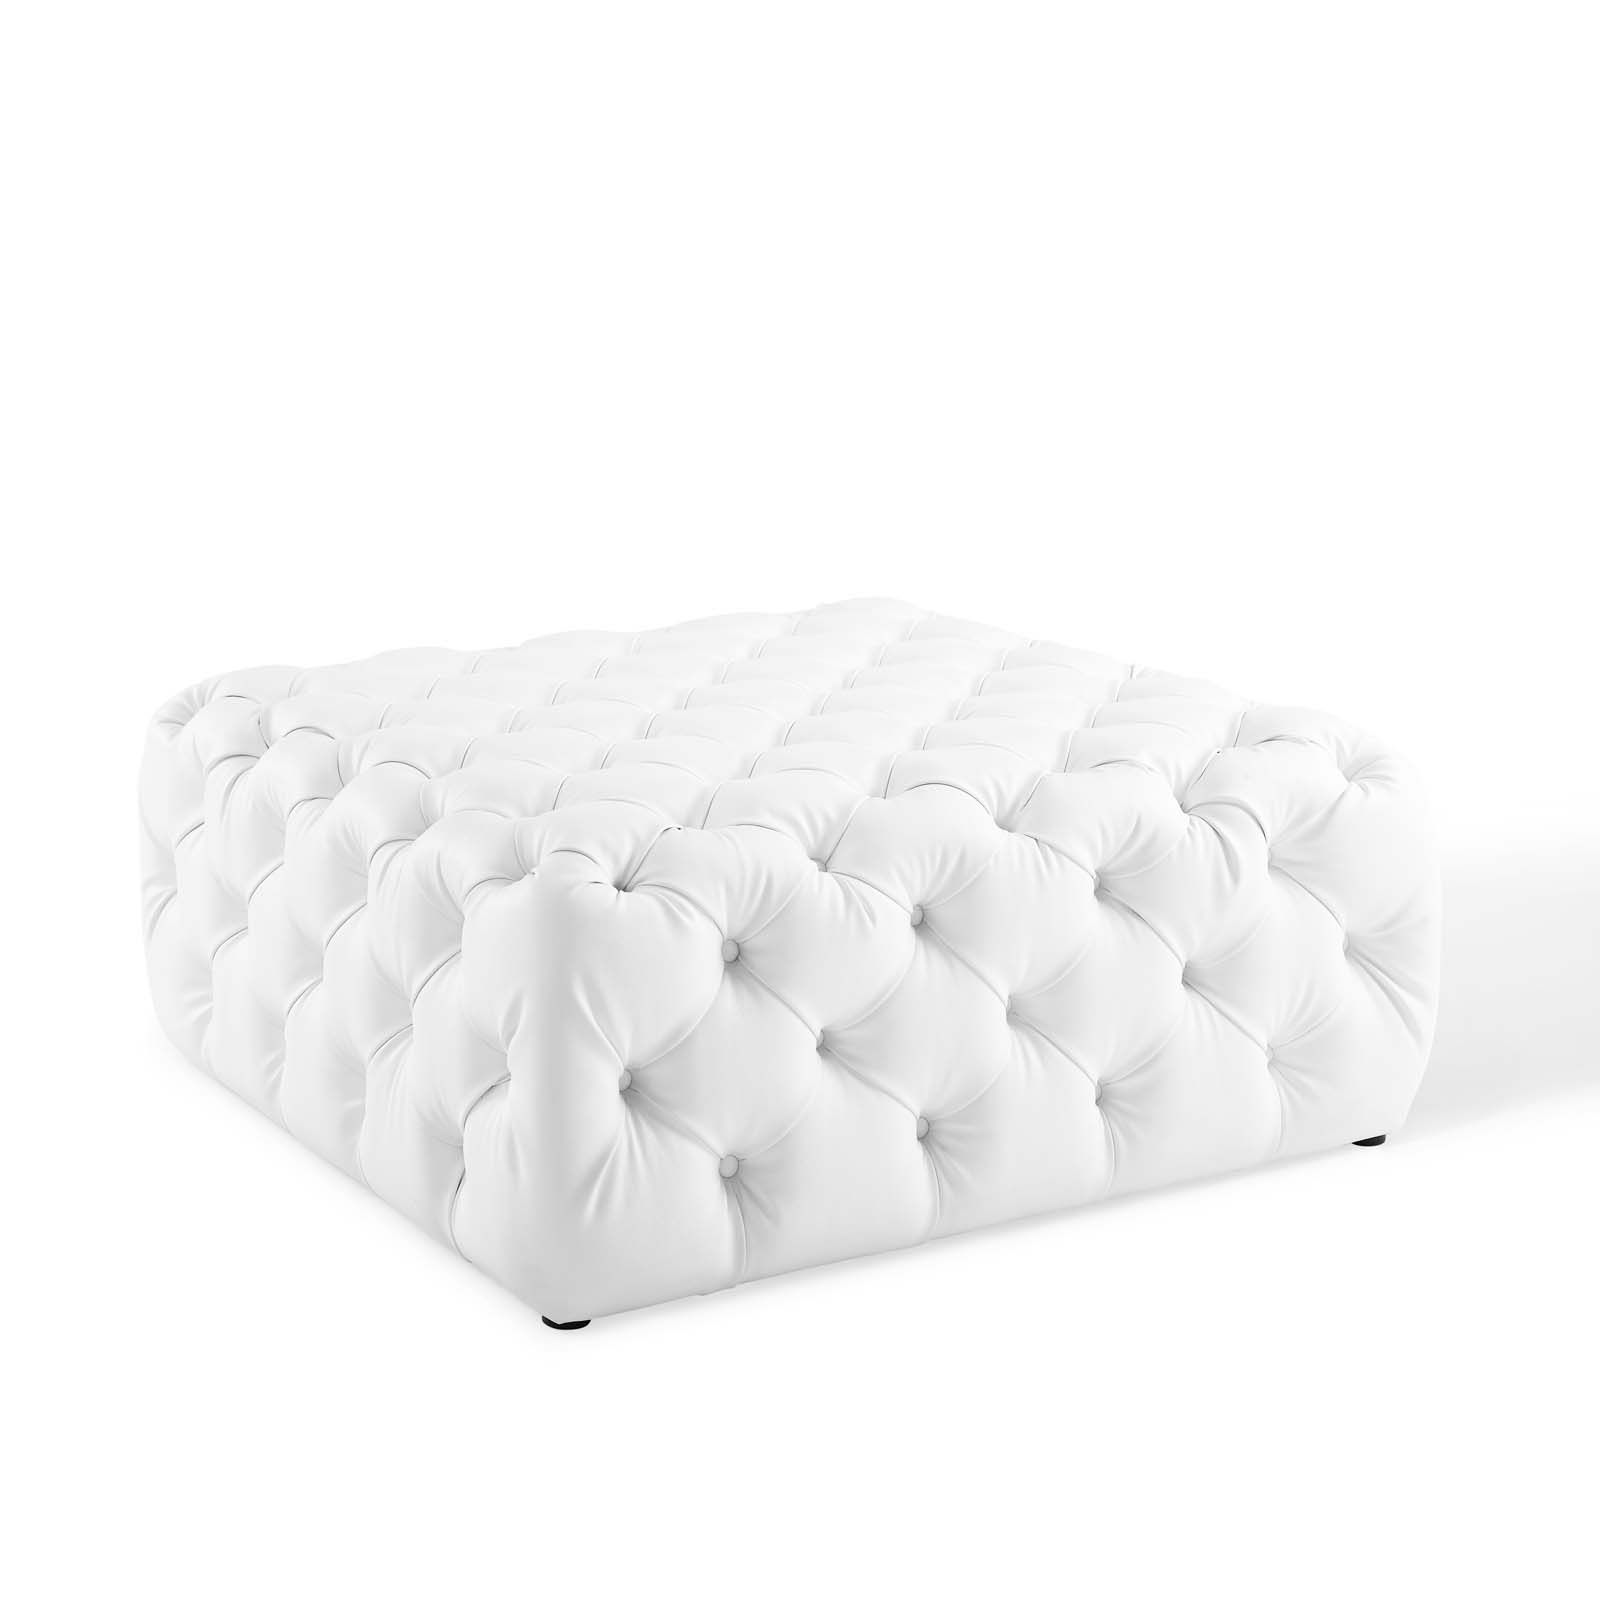 Anthem Tufted Button Large Square Faux Leather Ottoman White Regarding White Leather And Bronze Steel Tufted Square Ottomans (View 10 of 20)